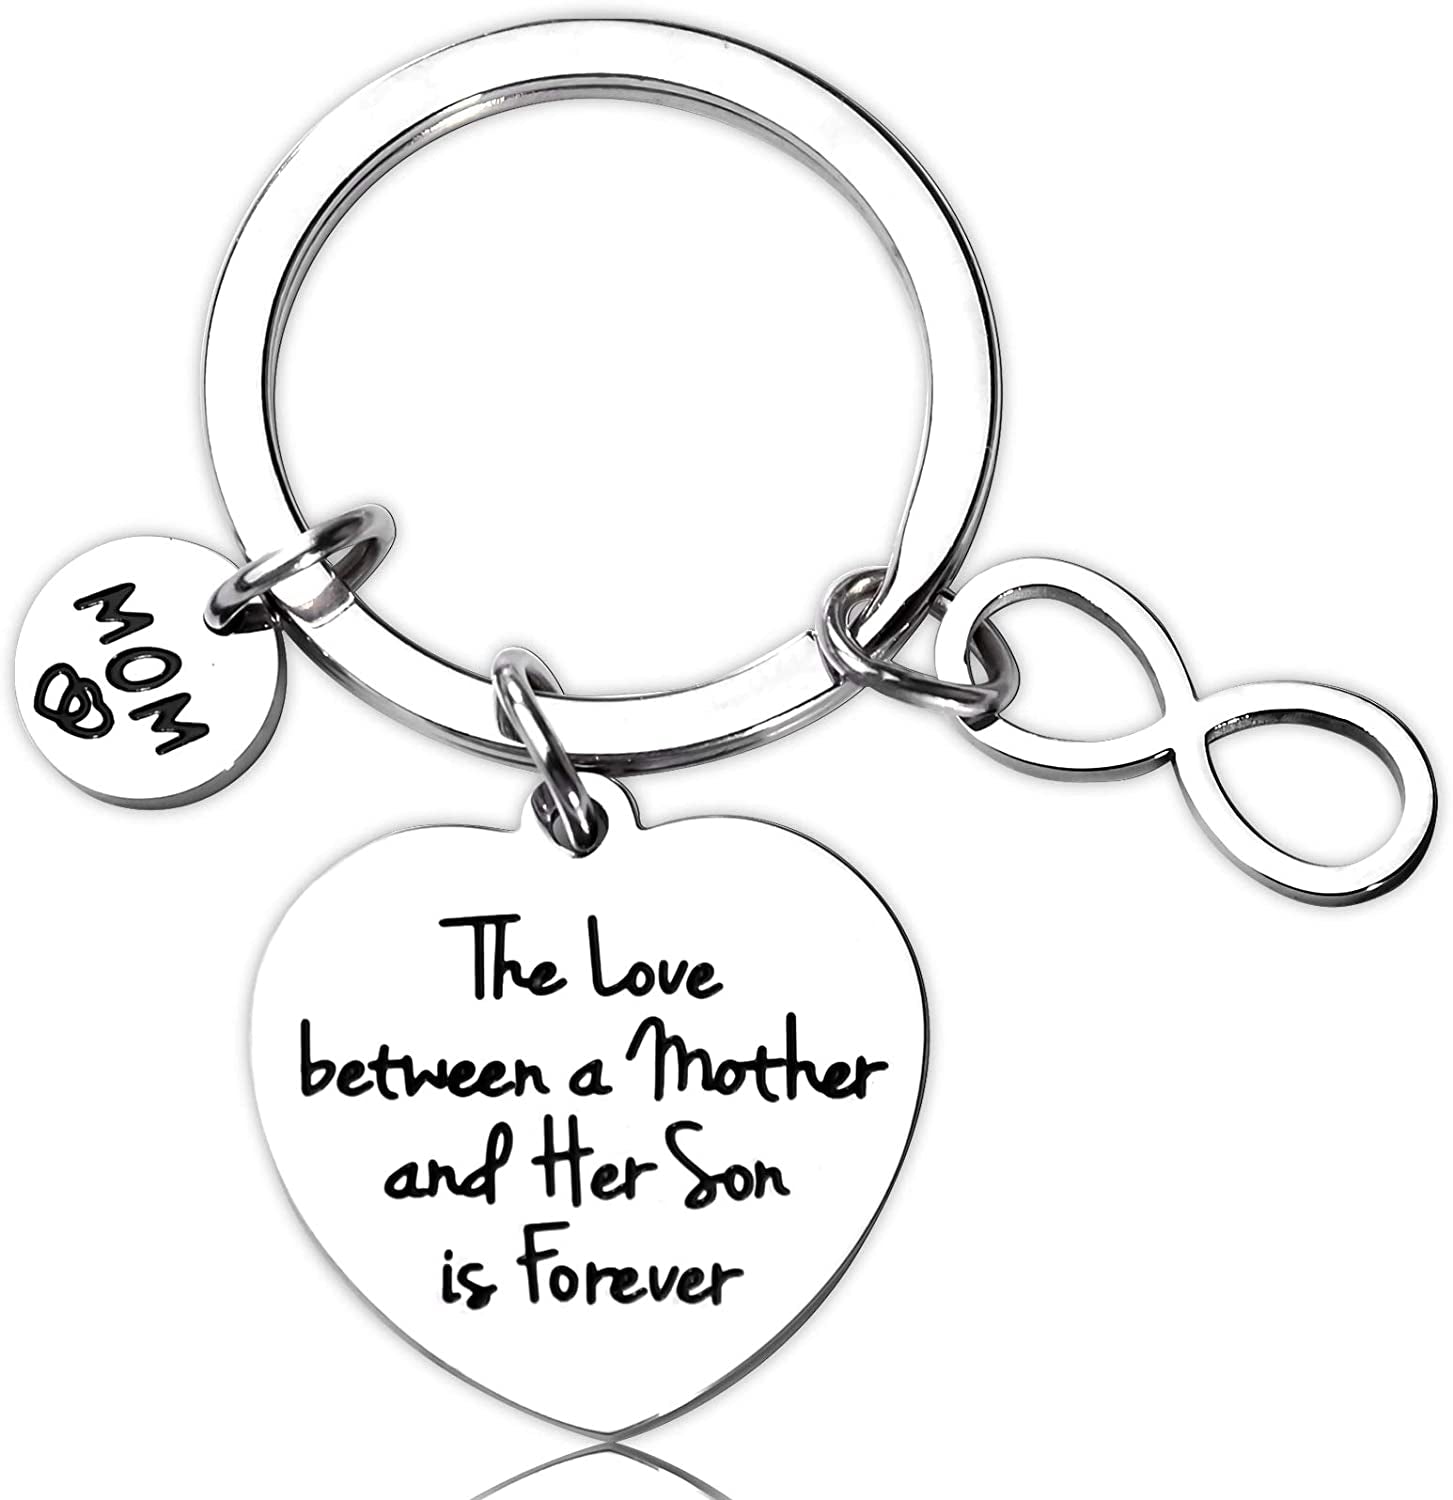  The love Between Mother and Son is Forever Key Chain 